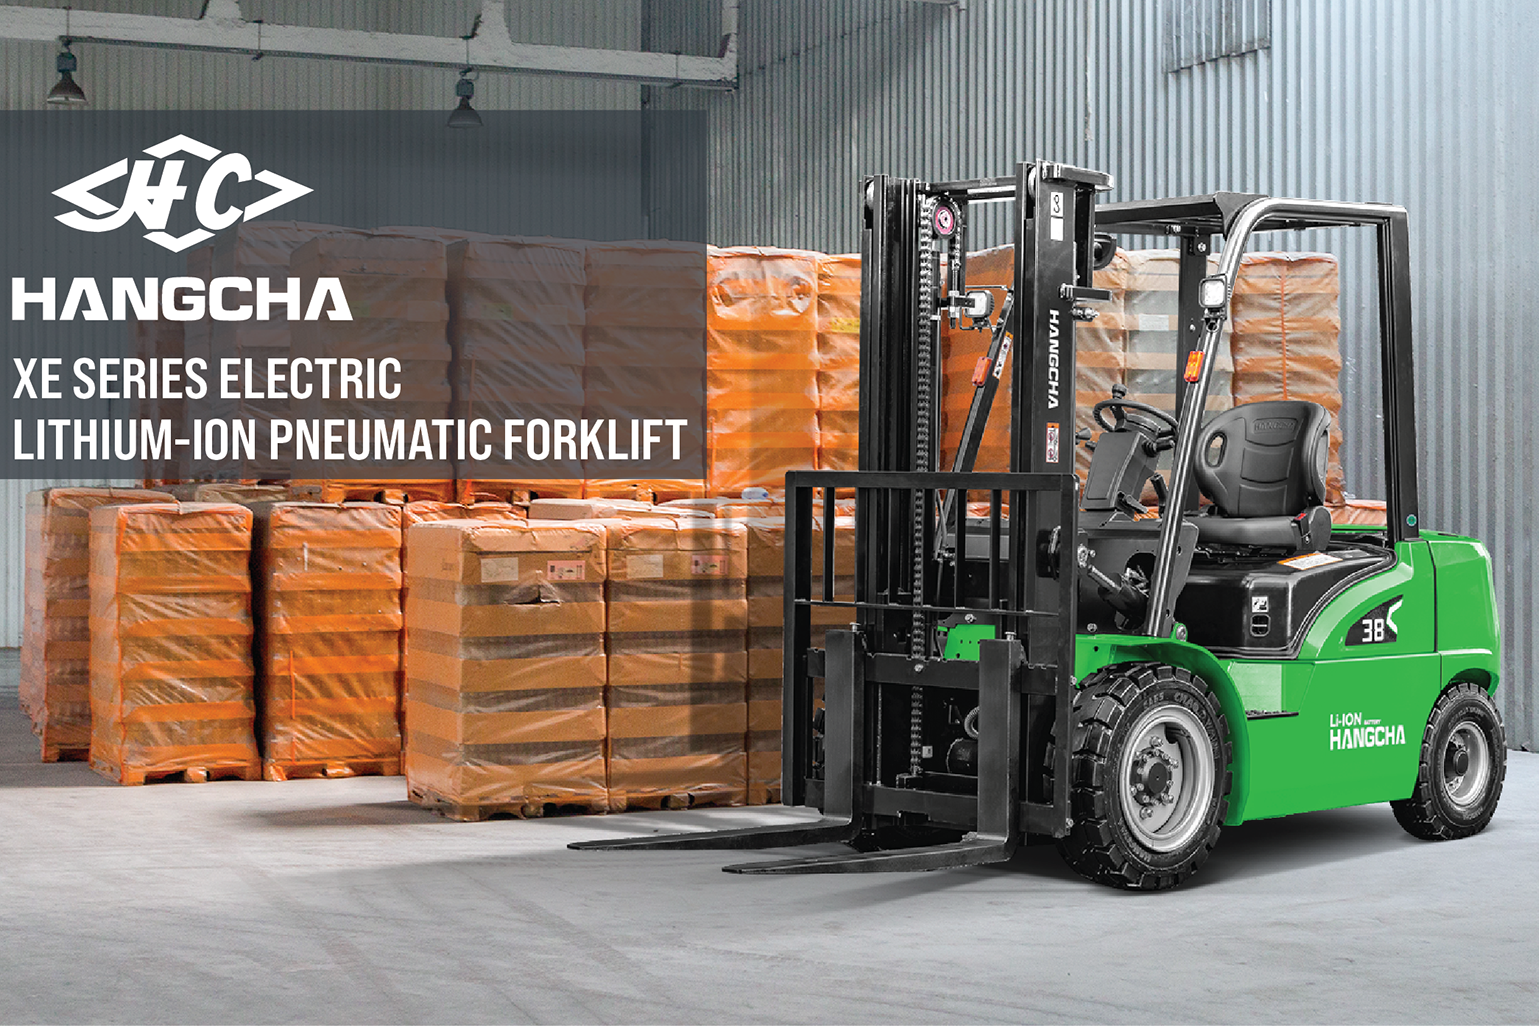 The New XE Series Electric Lithium-ion Pneumatic Forklift From Hangcha Group